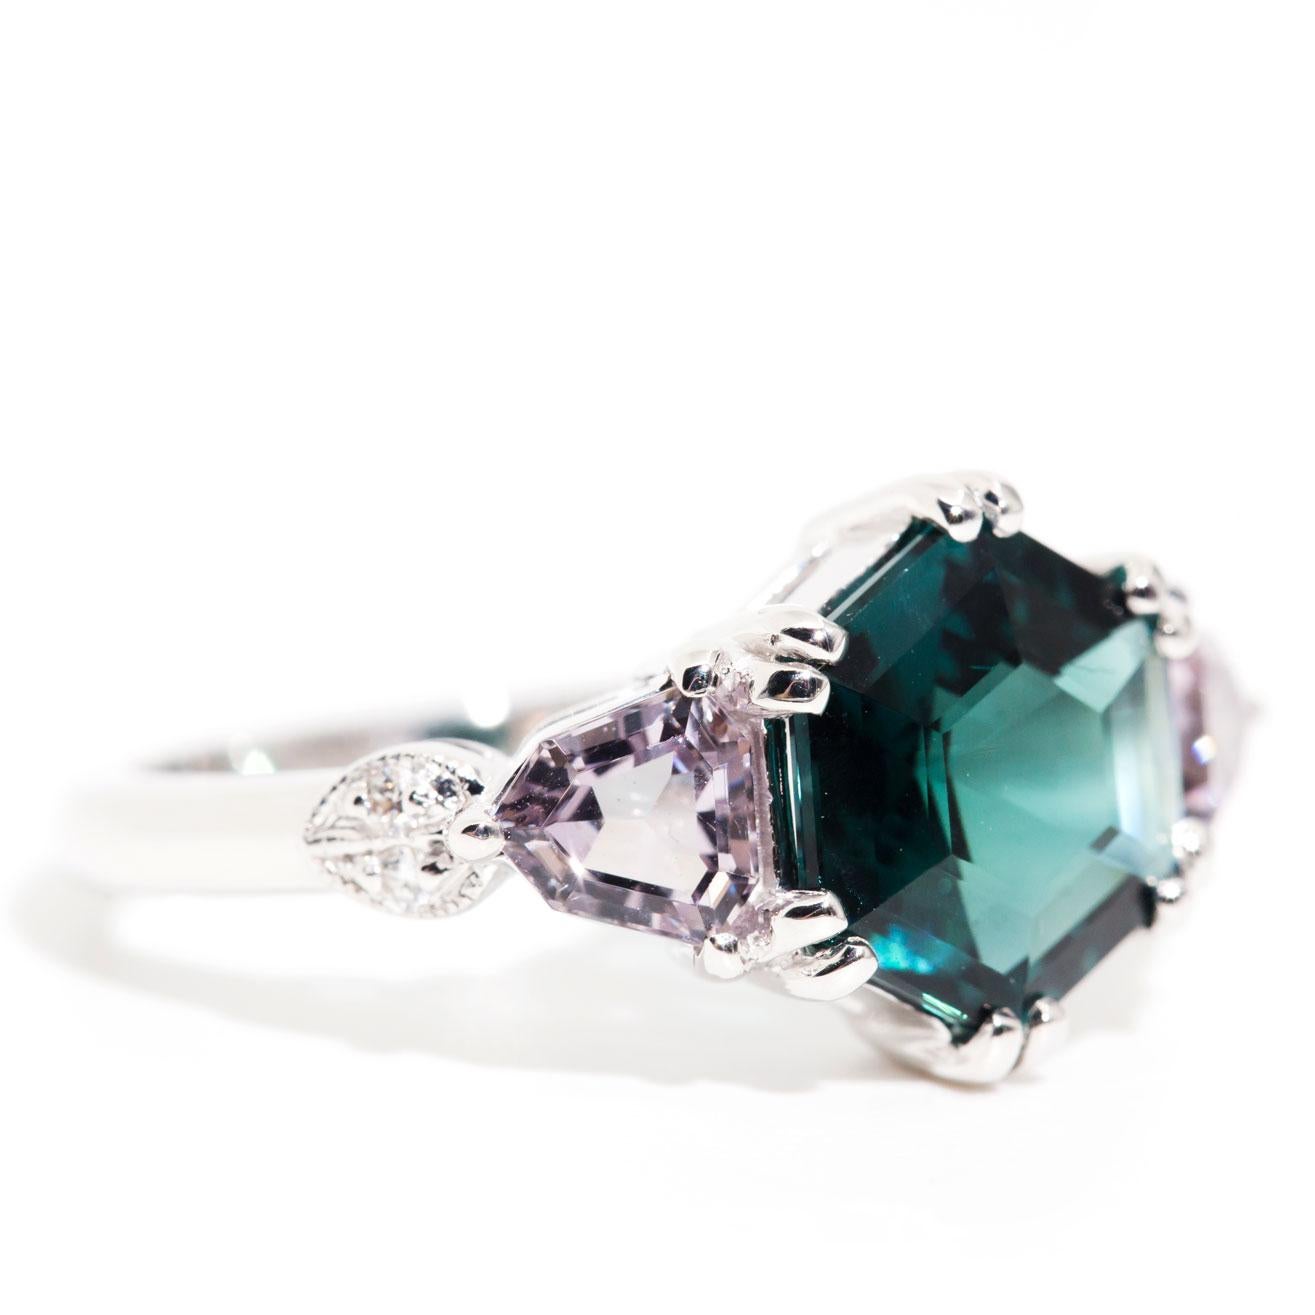 Hexagon Cut 2.46 Carat Hexagon Teal Tourmaline and Spinel 18 Carat White Gold Cluster Ring